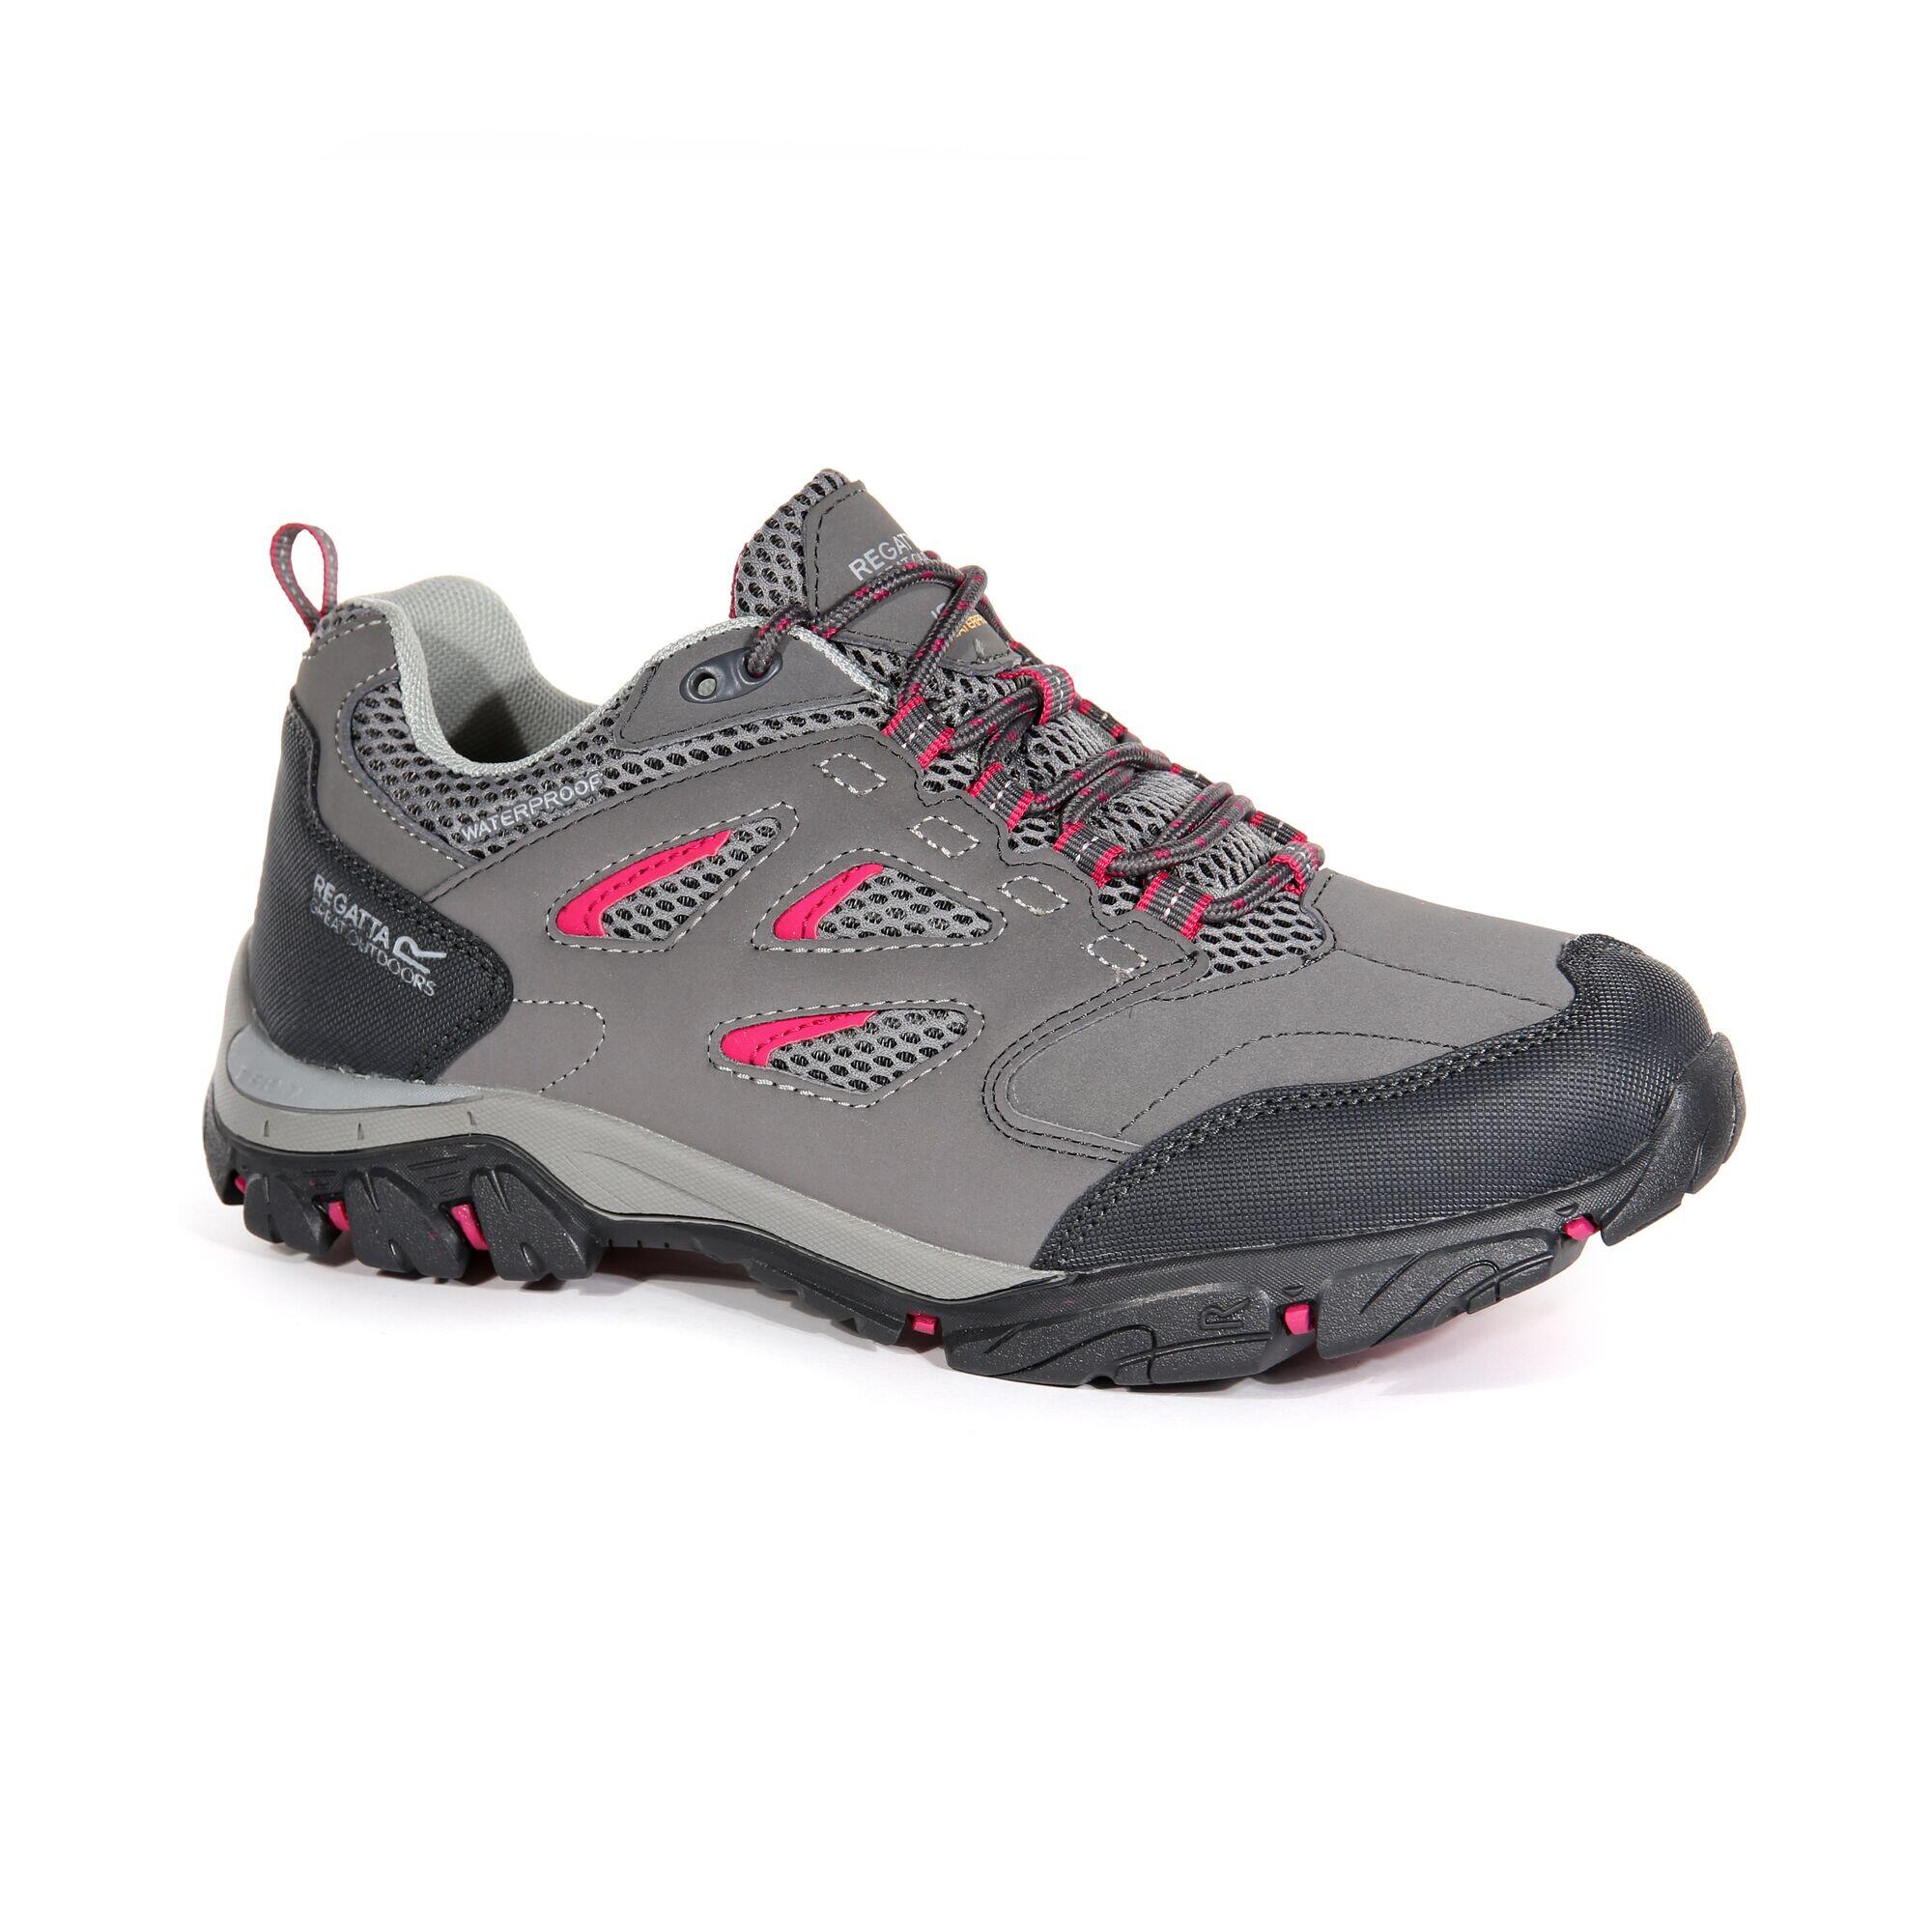 Lady Holcombe IEP Low Women's Hiking Boots - Steel Grey / Pink 2/5